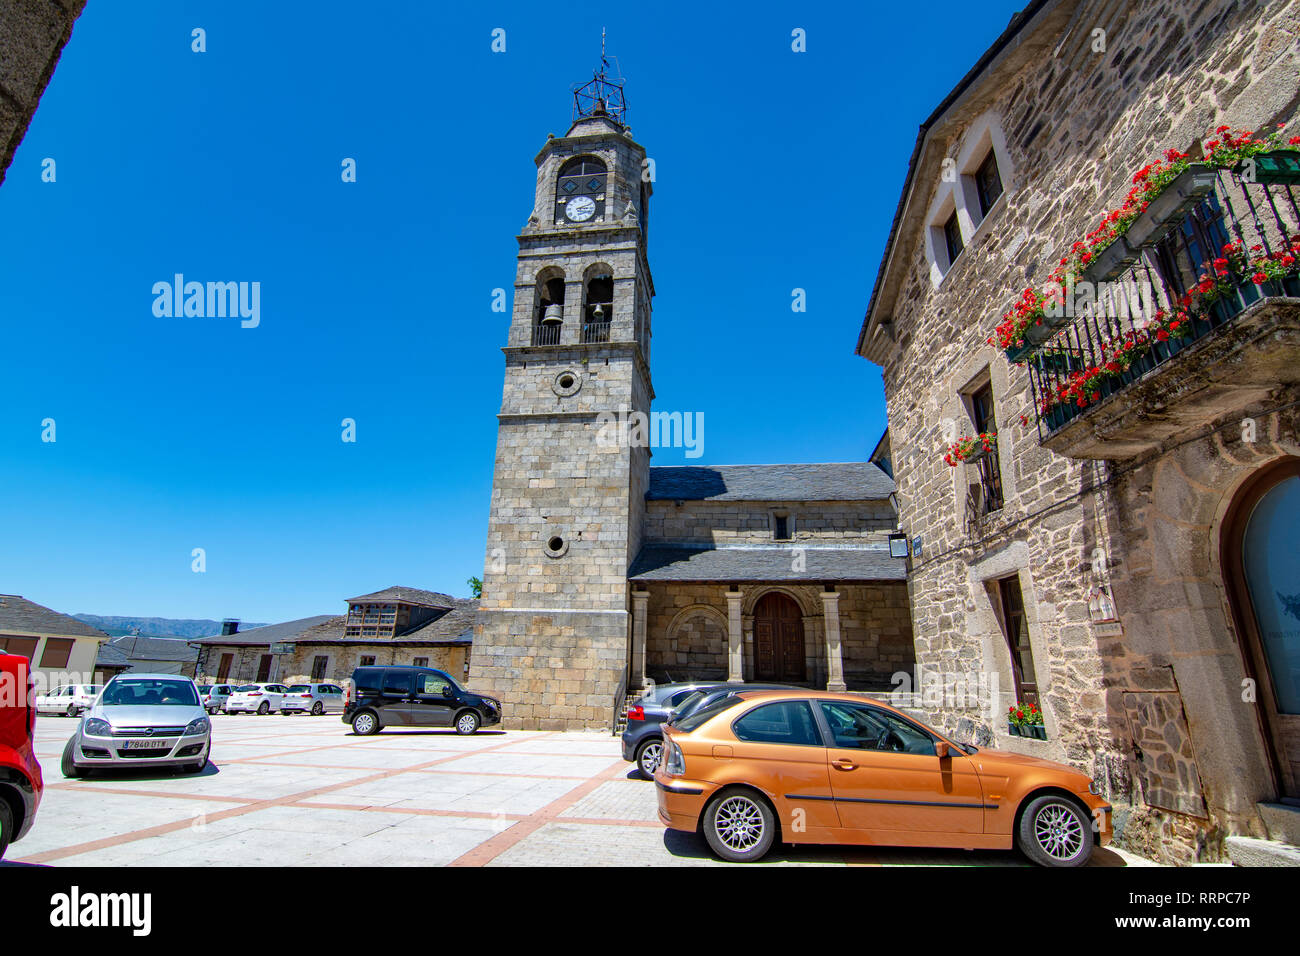 Puebla de Sanabria, Zamora, Spain, June 2017: view of tower of the church  of the medieval village of Puebla de Sanabria in the province of Zamora. Stock Photo